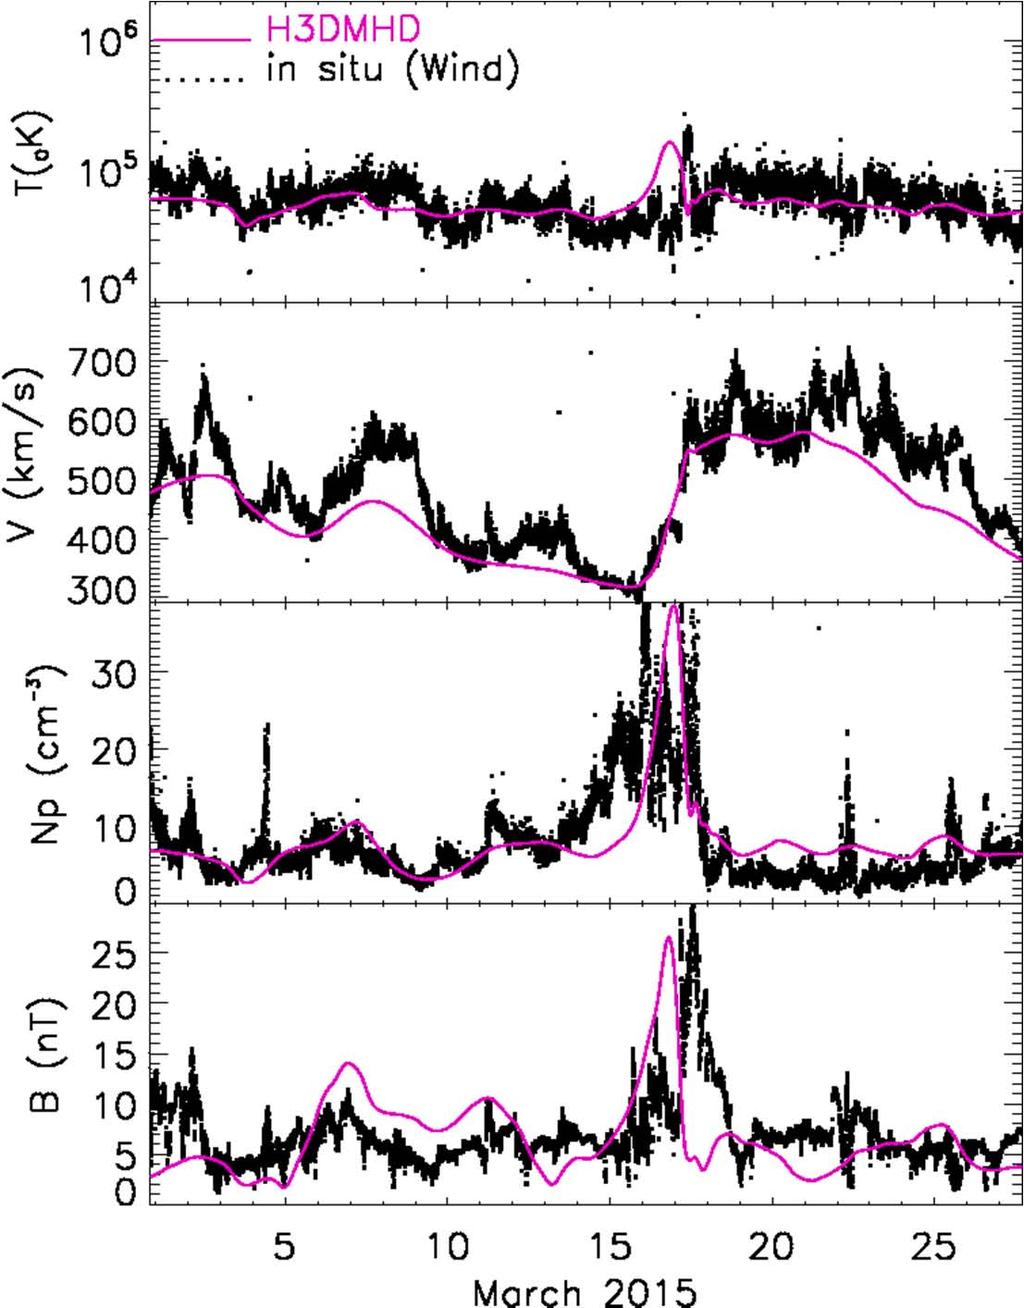 Comparison of IPS-3DMHD and observation Observation (black dotted curves observed by Wind) and simulation (pinksolid curved simulated by IPS H3DMHD) of solar wind